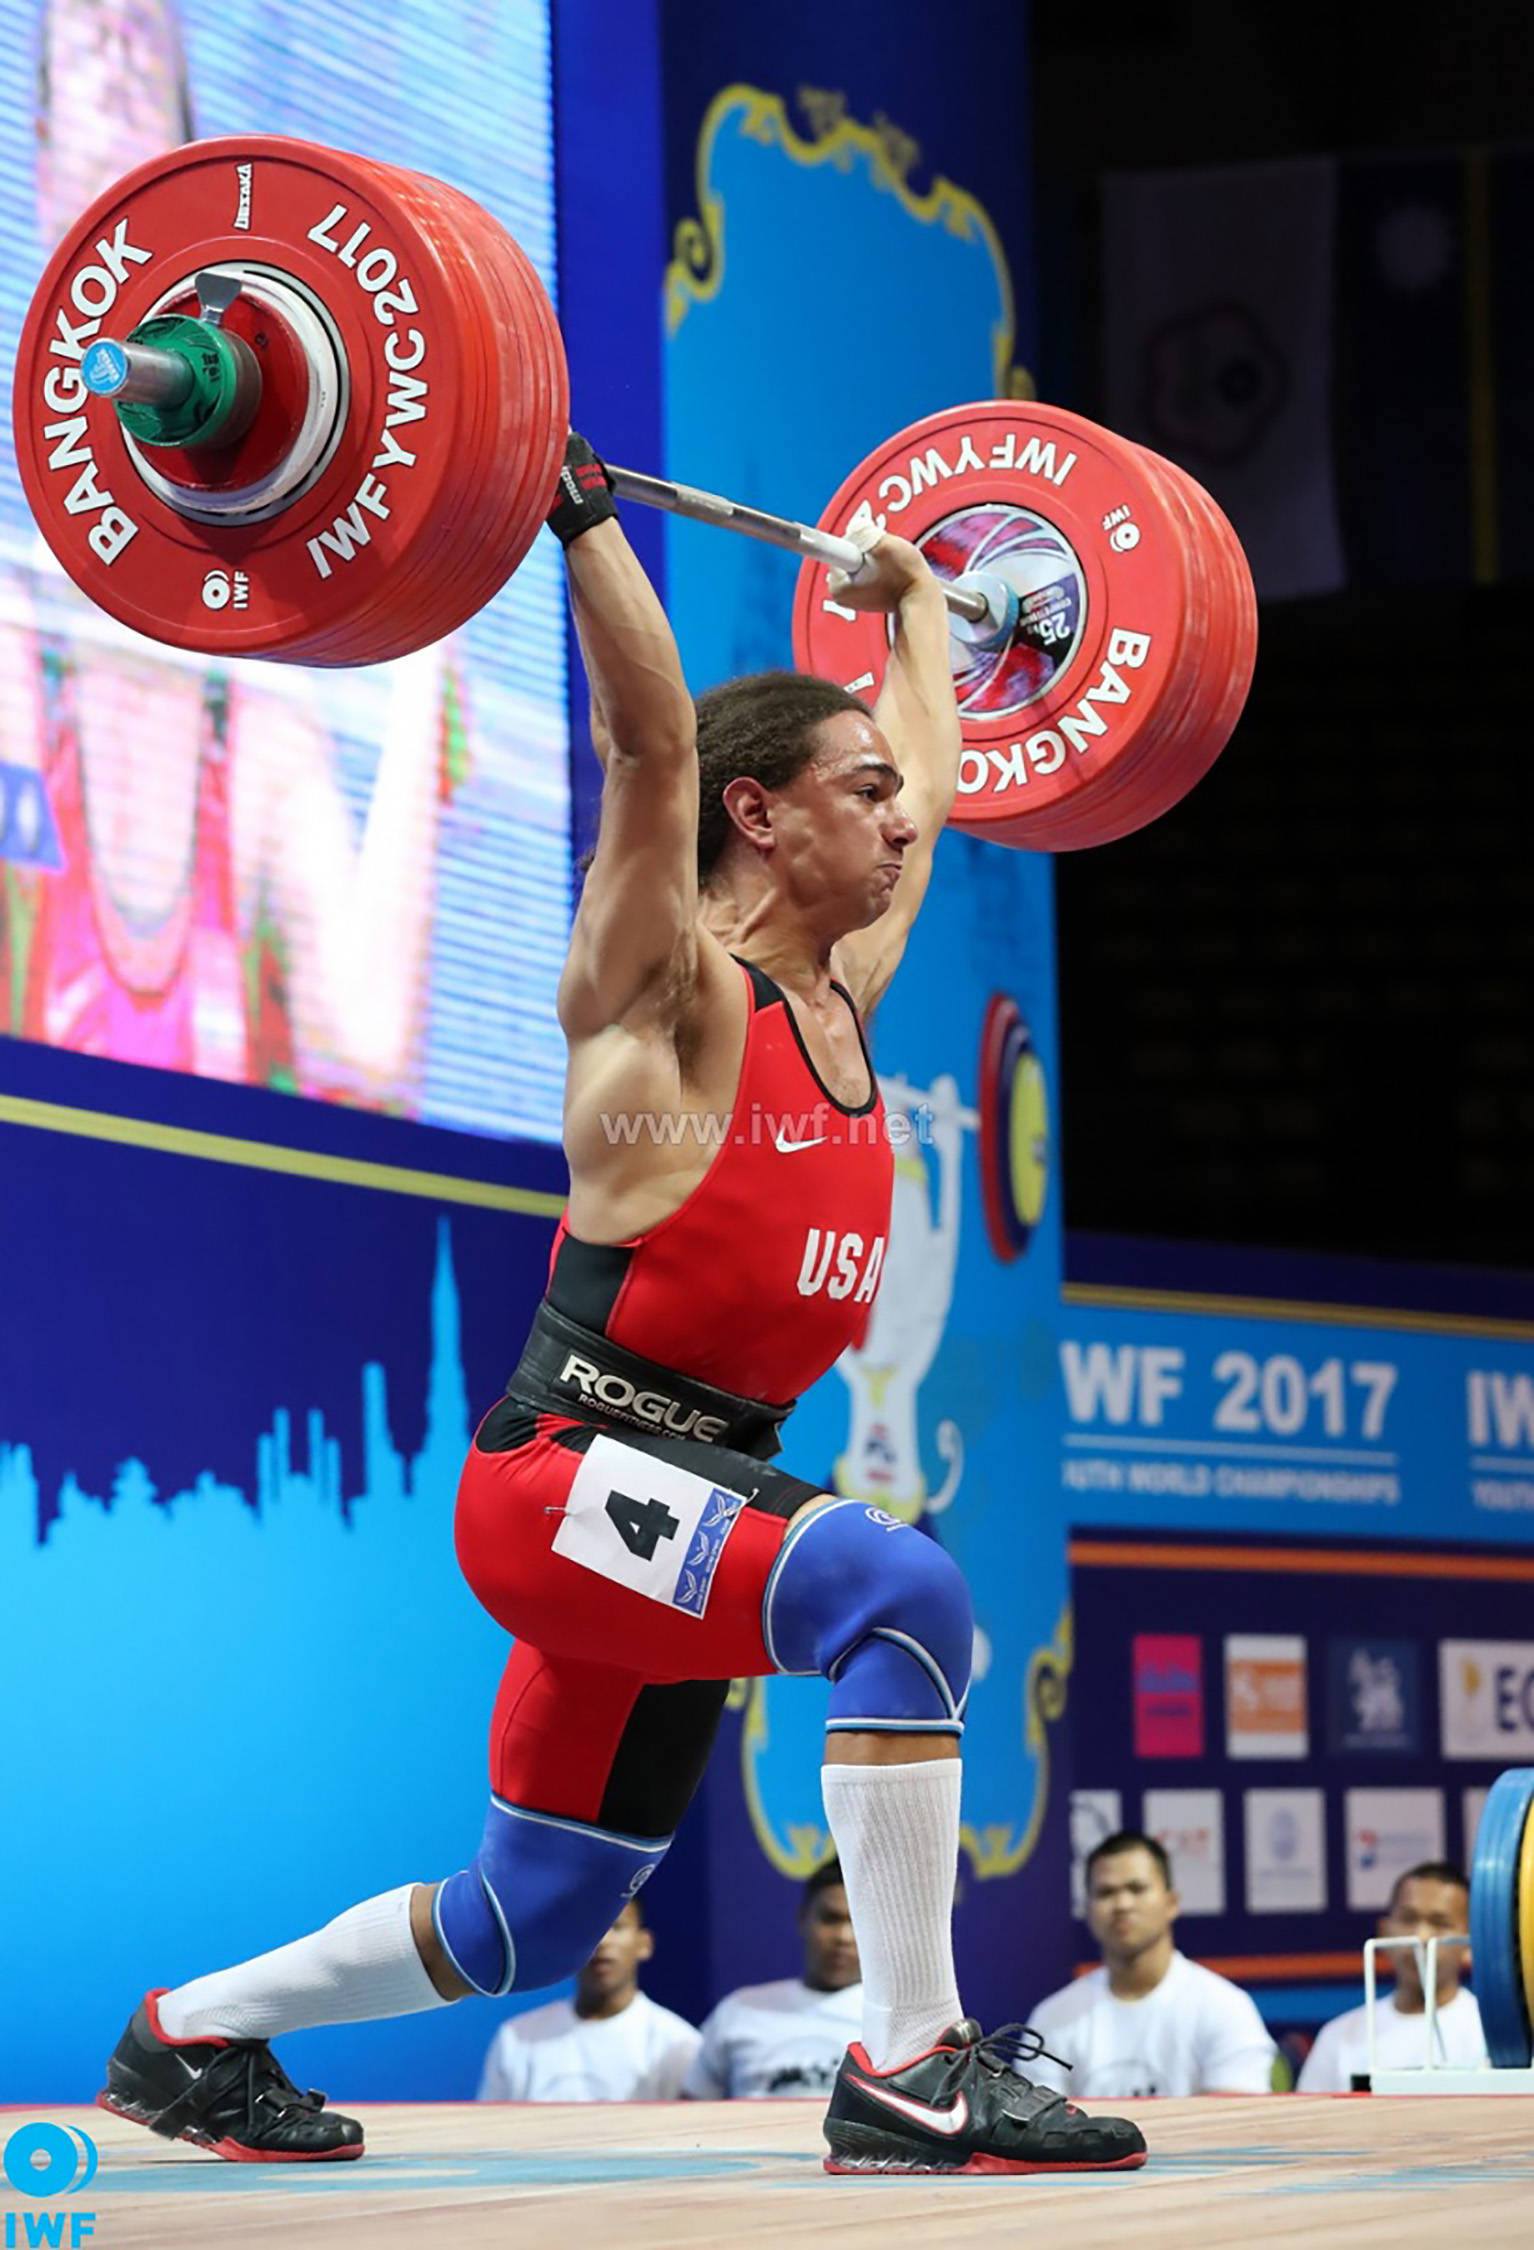 Auburn’s Harrison Maurus, 17, set a world record with a 423-pound clean and jerk at the International Weightlifting Federation Youth World Championships in taking the world title. COURTESY PHOTO, International Weightlifting Federation